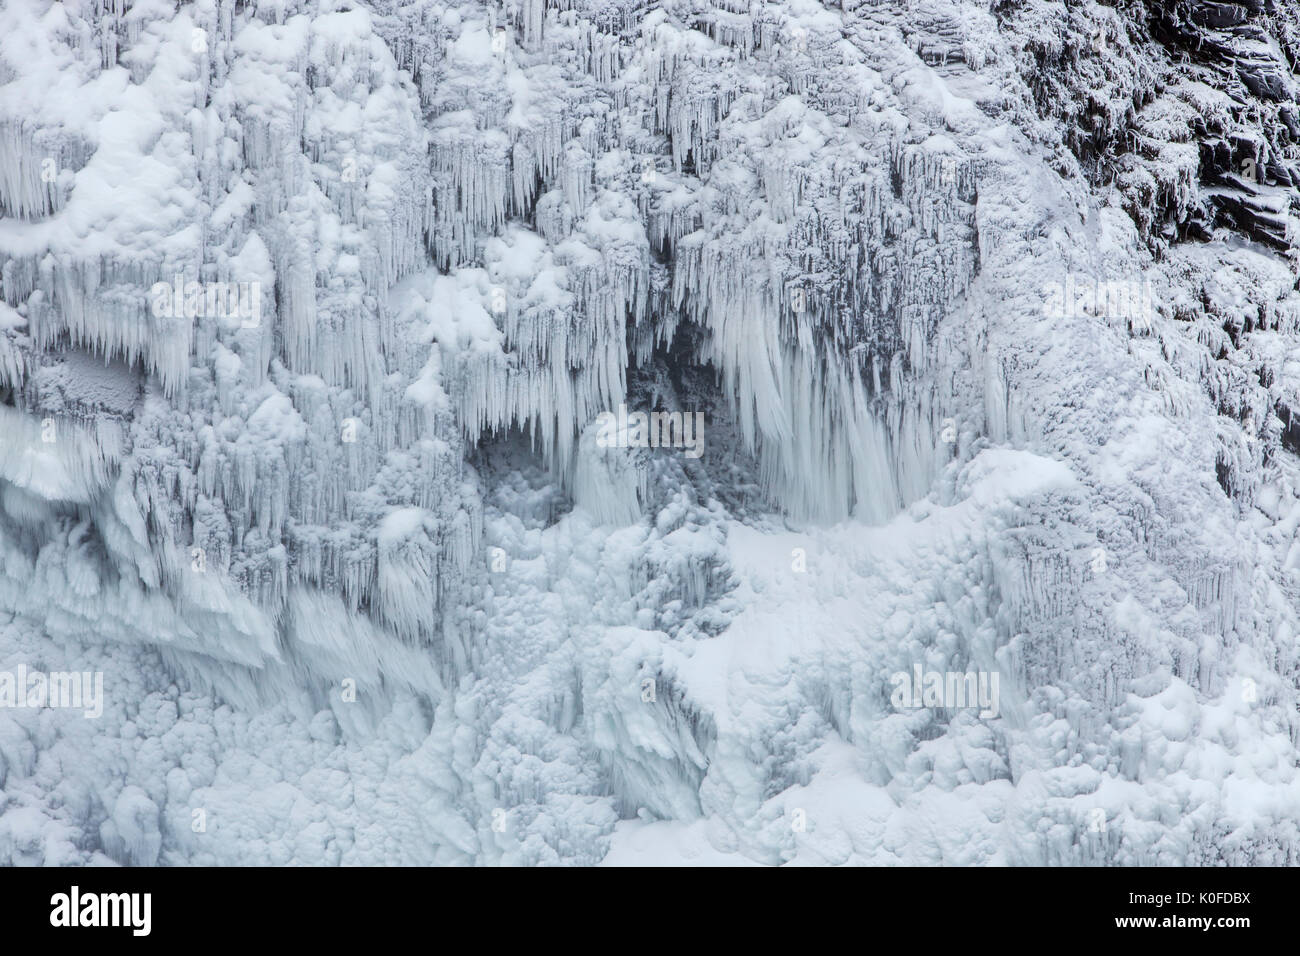 Rime ice and hoars frost near Snoqualmie Falls in Snoqualmie, Washington, USA. Stock Photo